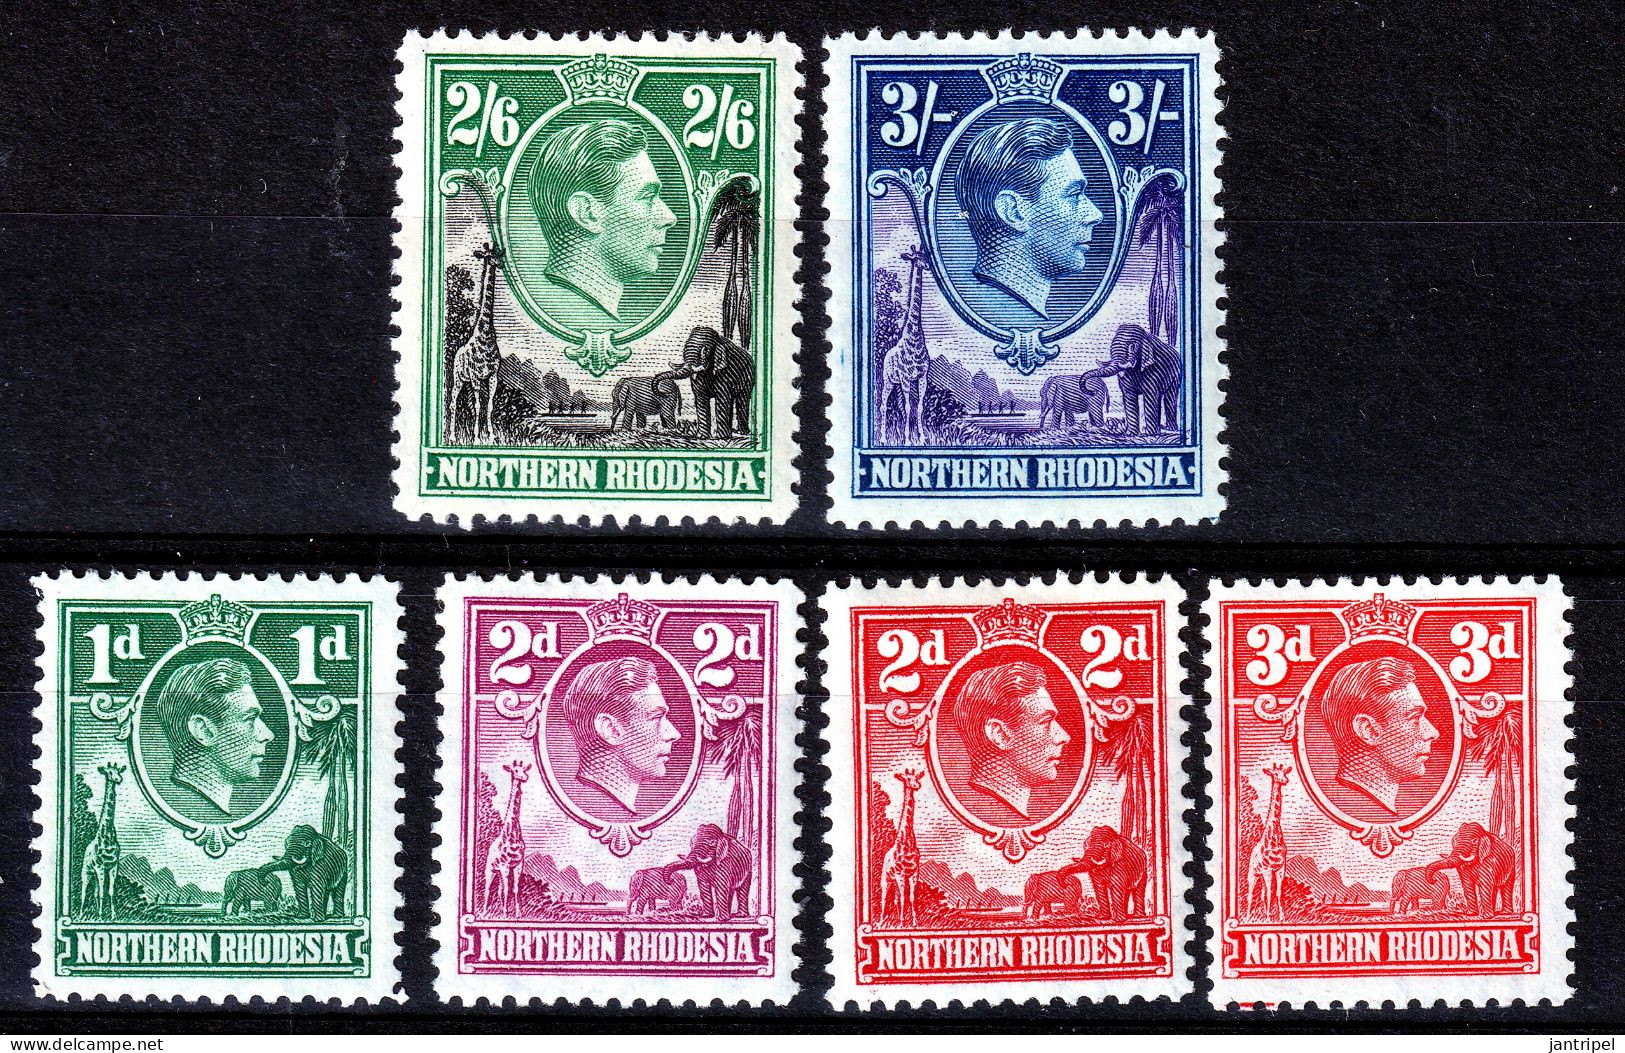 NORTHERN RHODESIA 1938 SOME MH KGVI VALUES - Northern Rhodesia (...-1963)